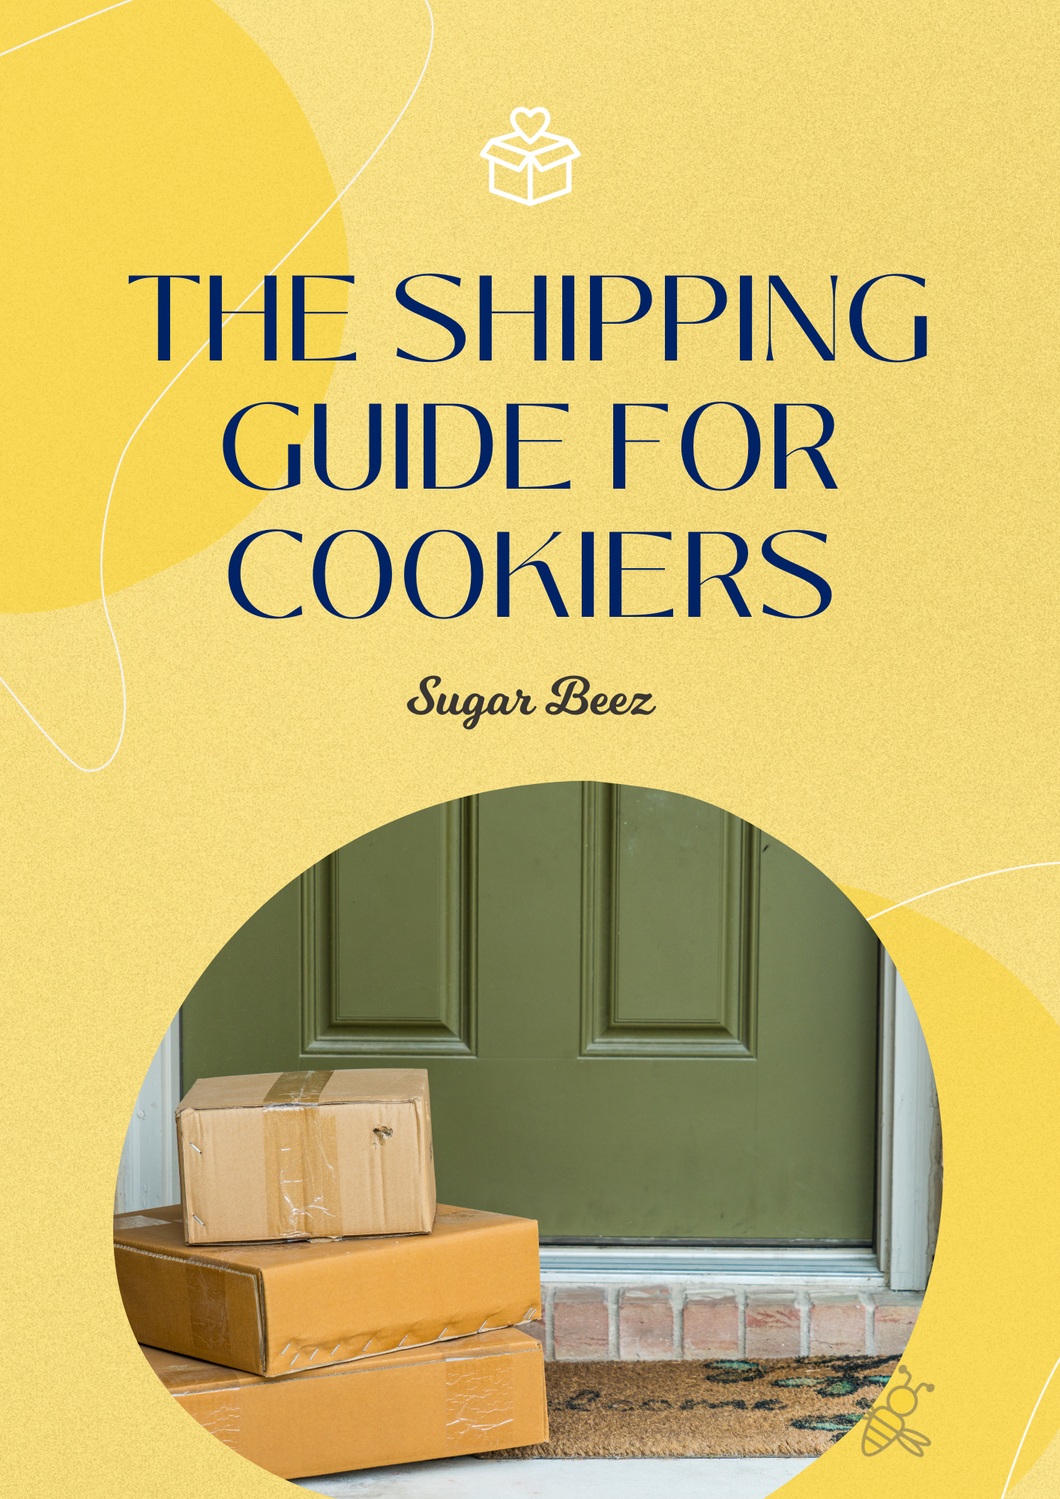 The Shipping Guide for Cookies